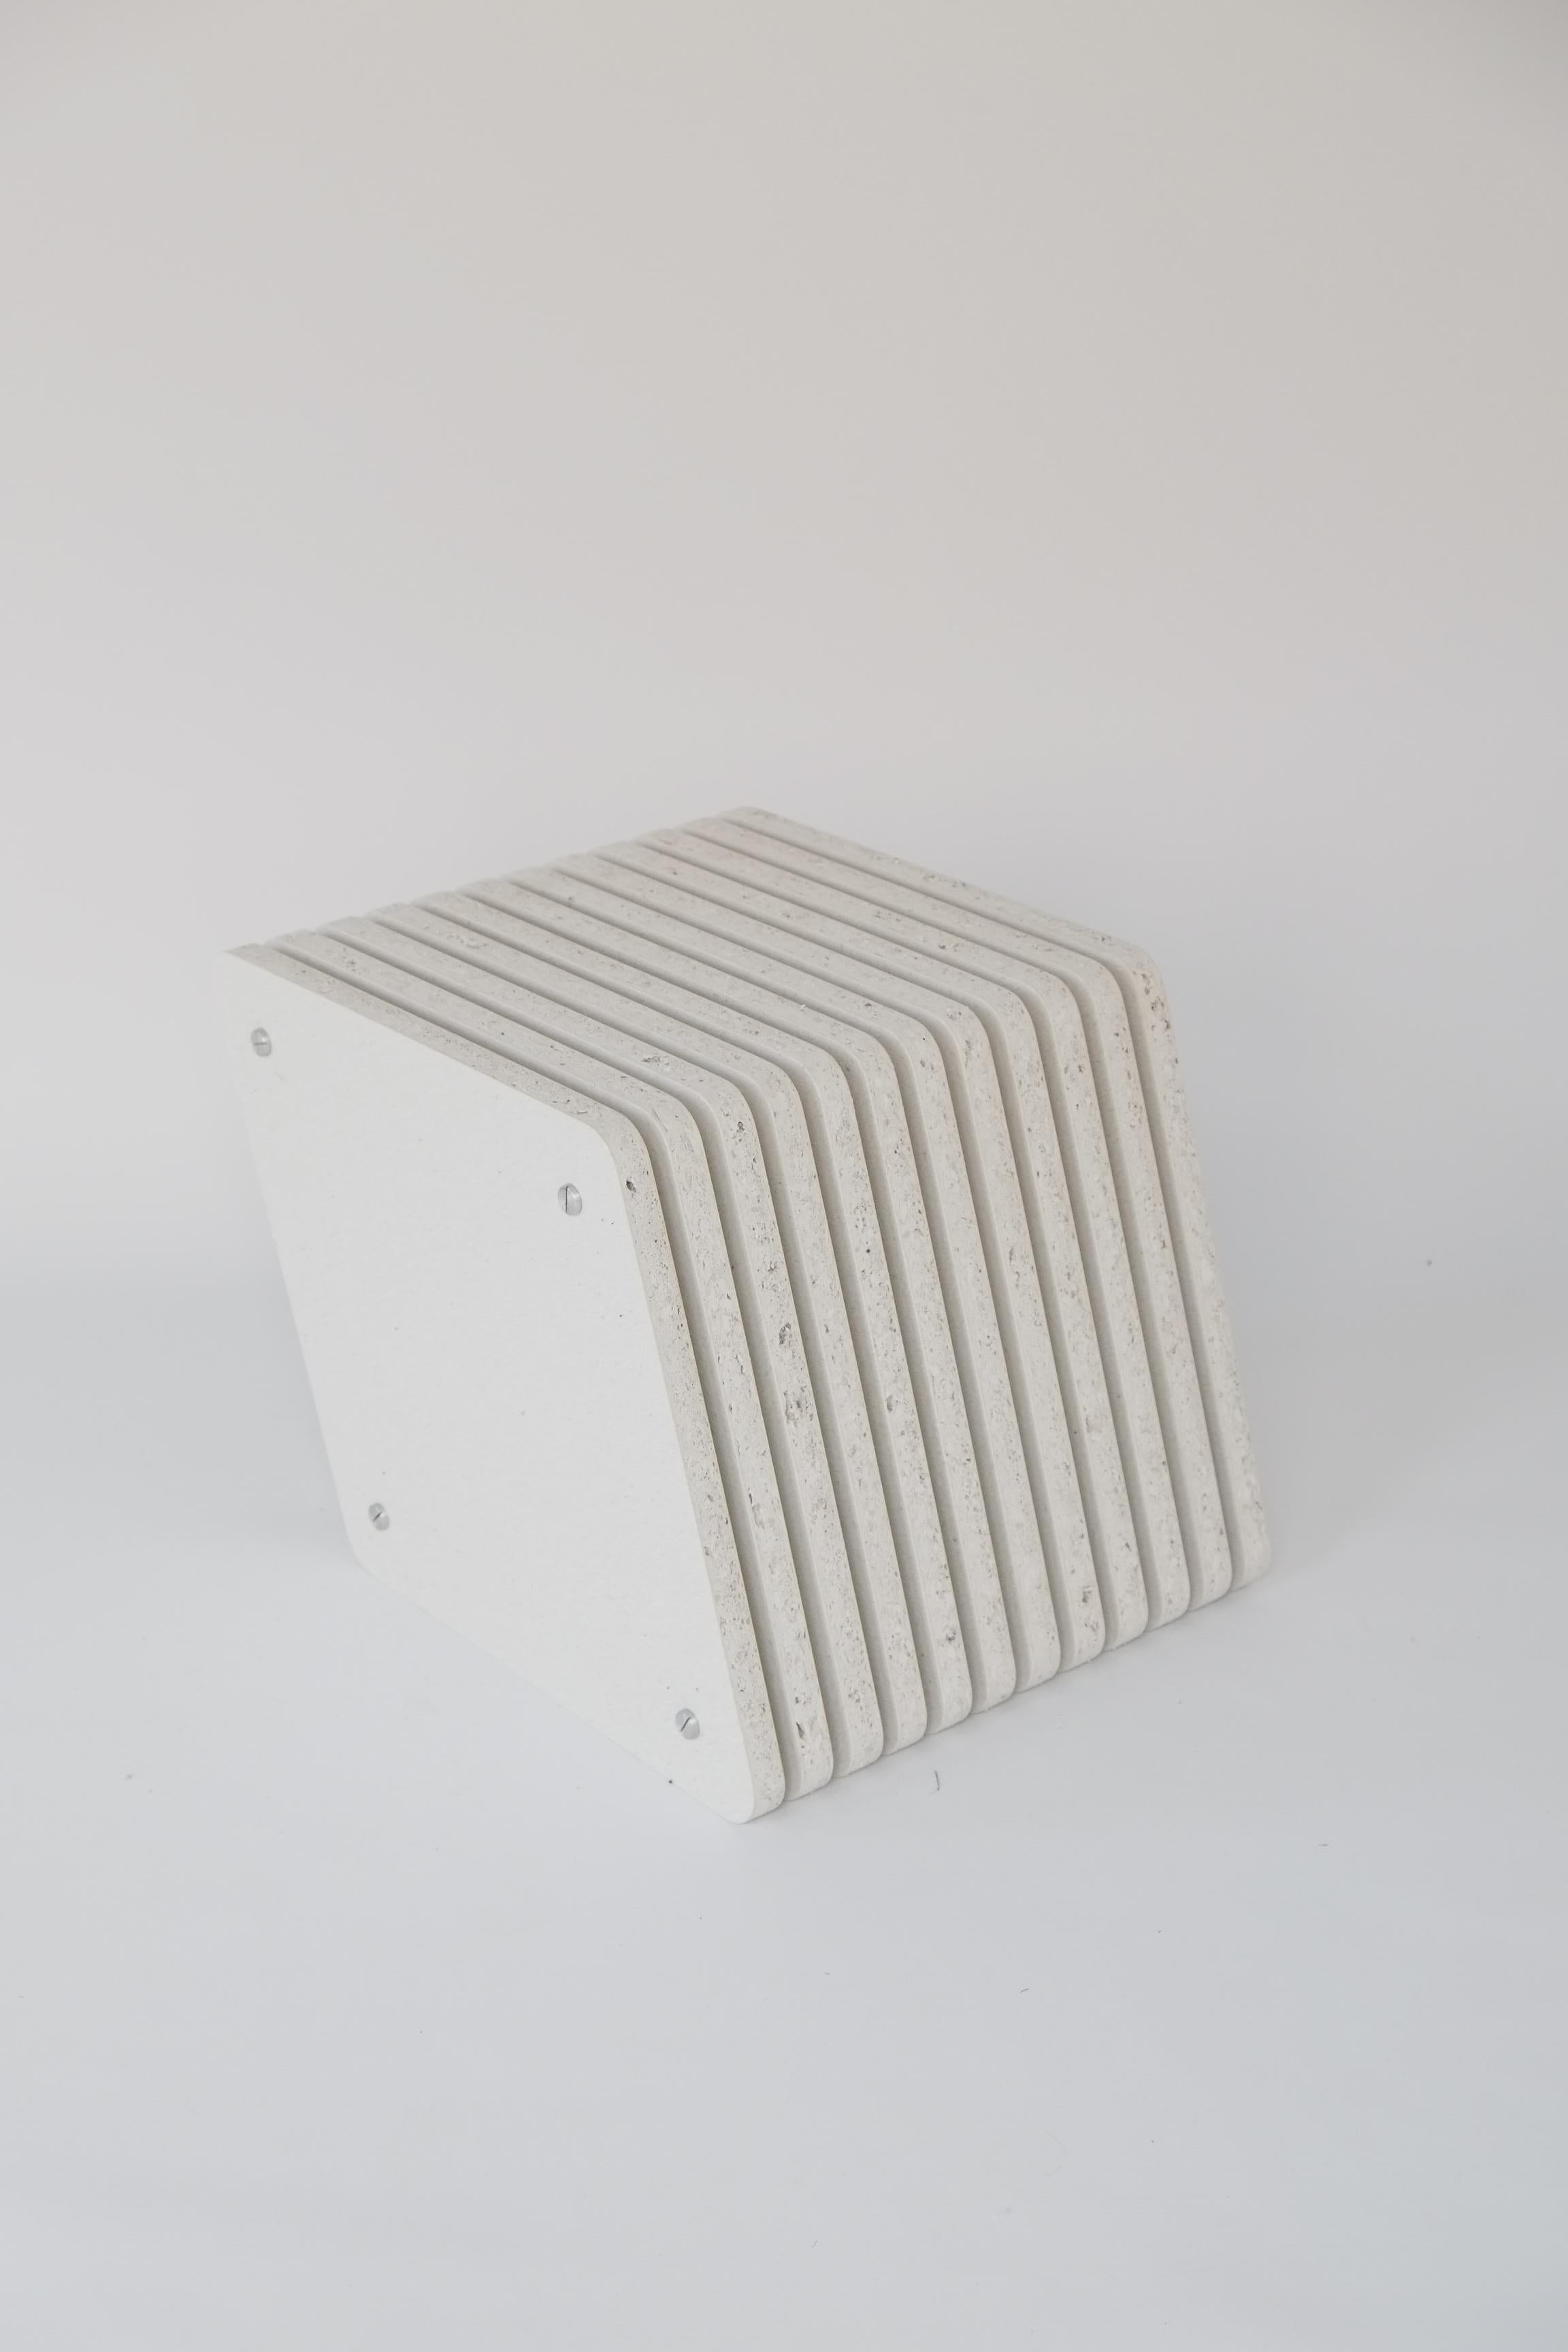 Aluminum Inside / Outside Jää Cube Side Table / Seat - Recycled Plastic - Pair Available For Sale